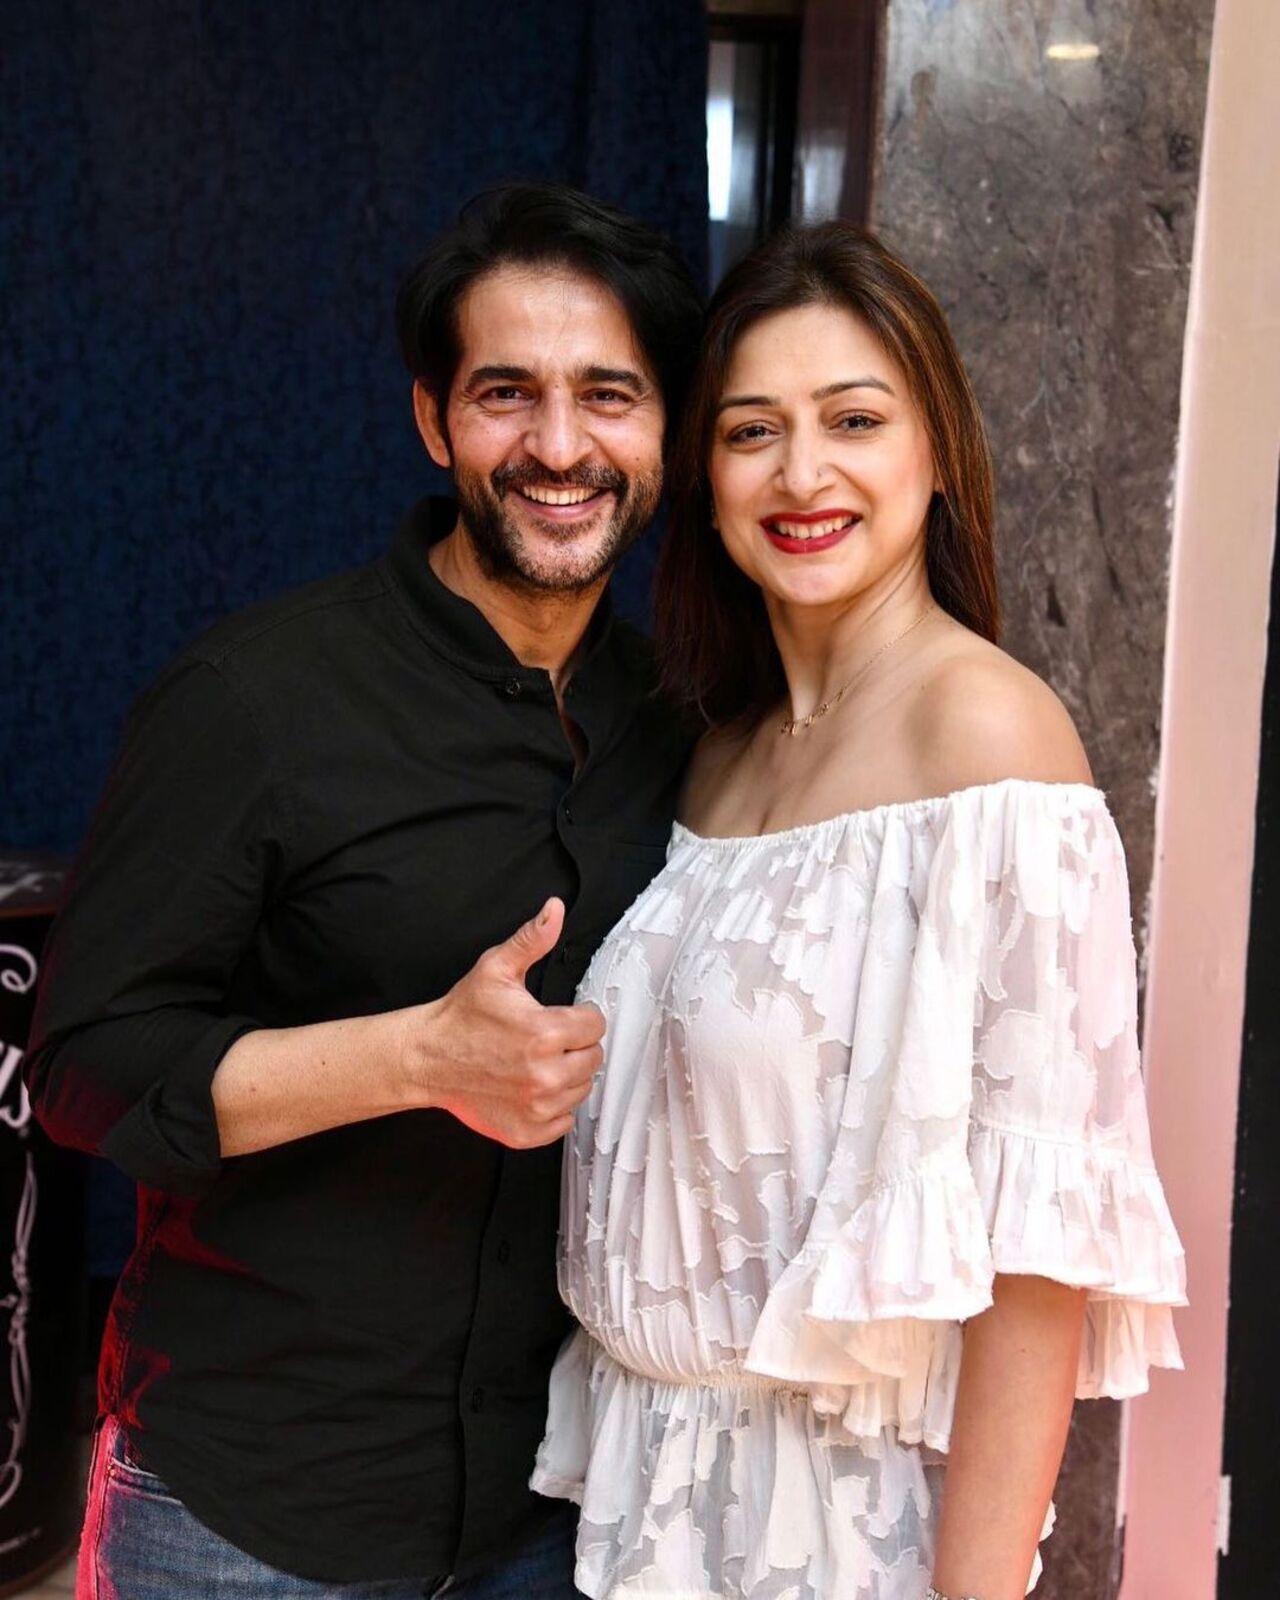 Hiten Tejwani and Gauri Pradhan are a renowned Indian celebrity couple who found love on the sets of a popular TV show 'Kutumb'